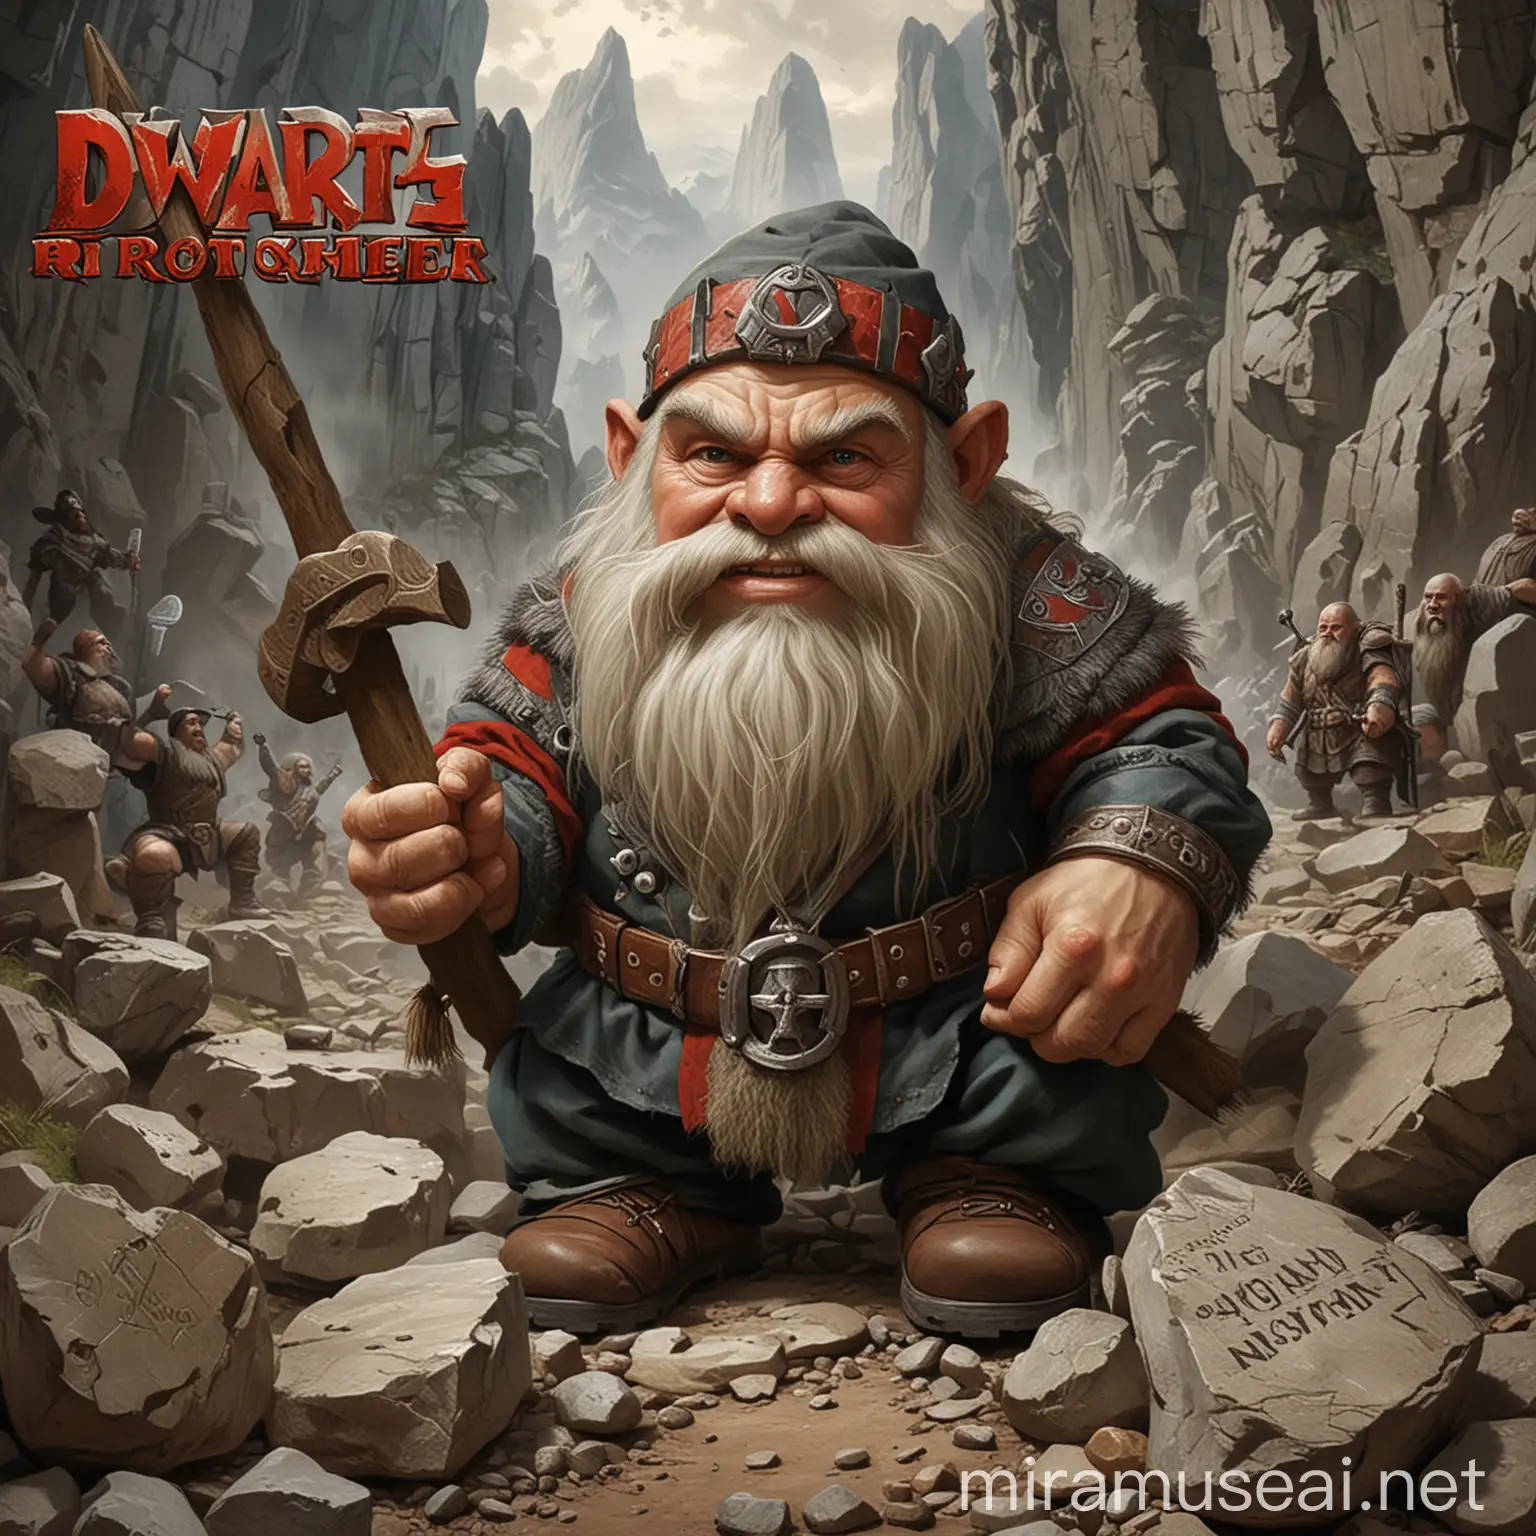 propaganda that promotes a dwarf nation with words saying for rock and stone!

